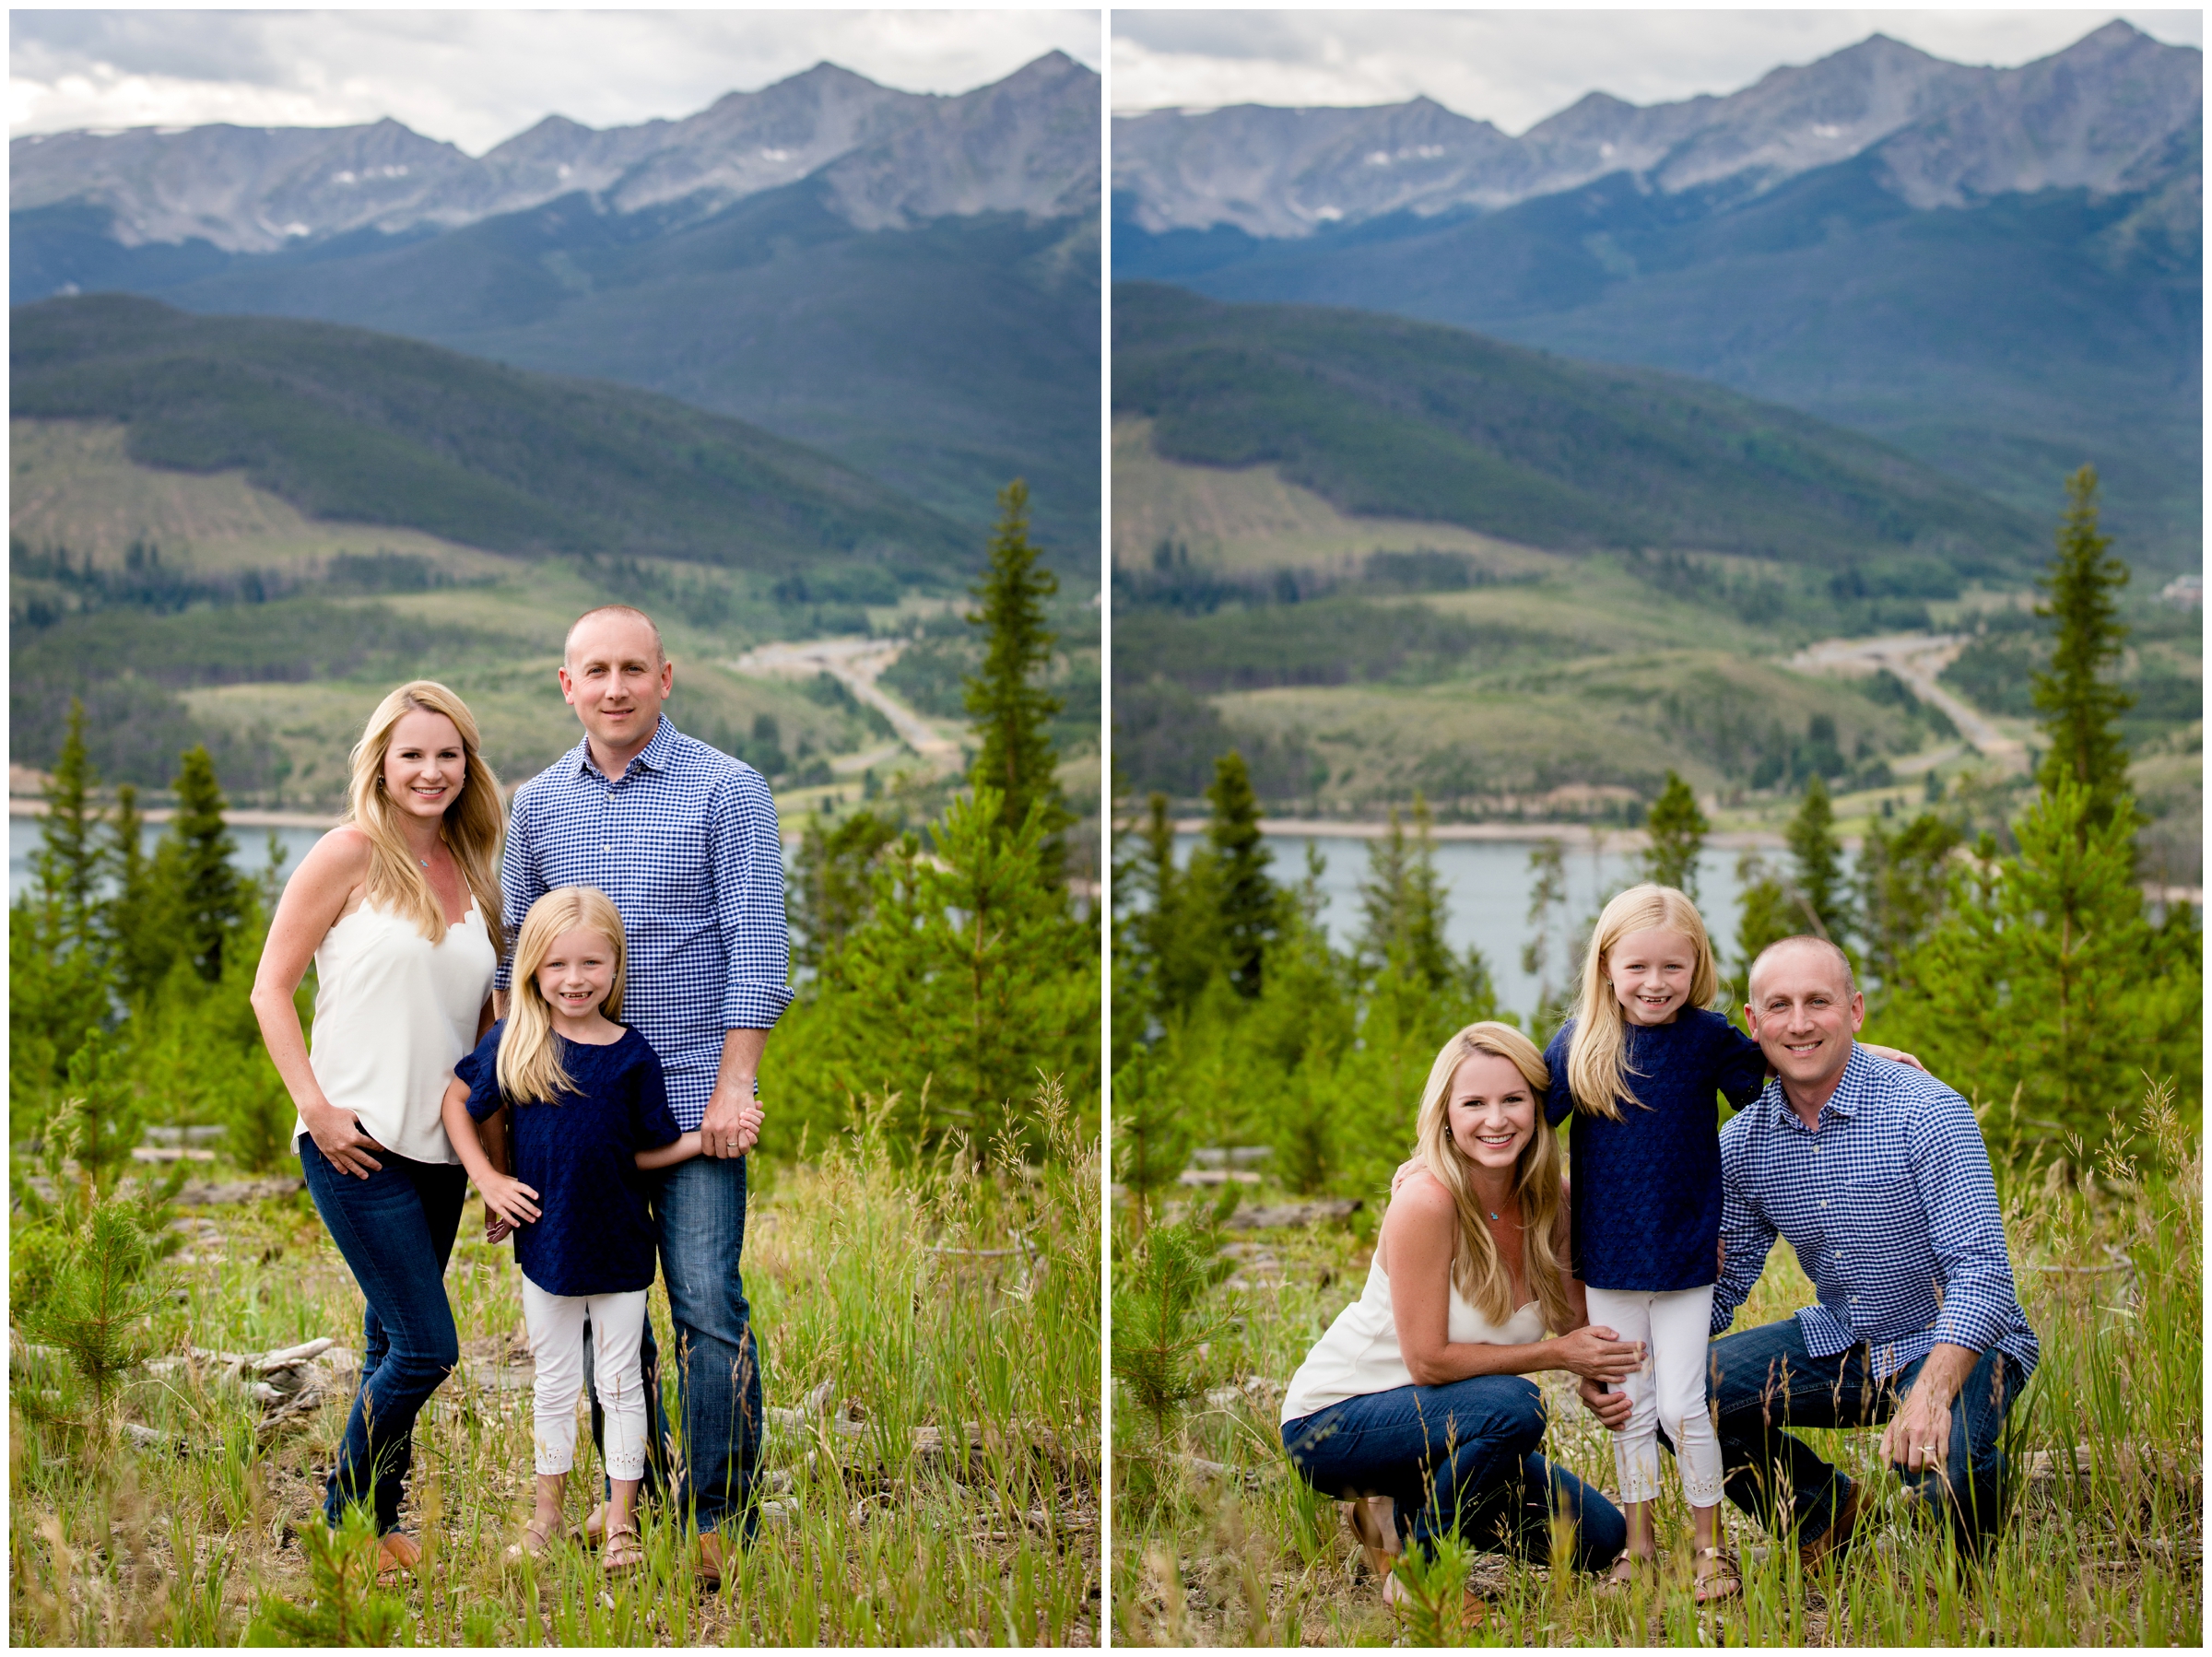 Breckenridge family portraits during summer with mountains in background 